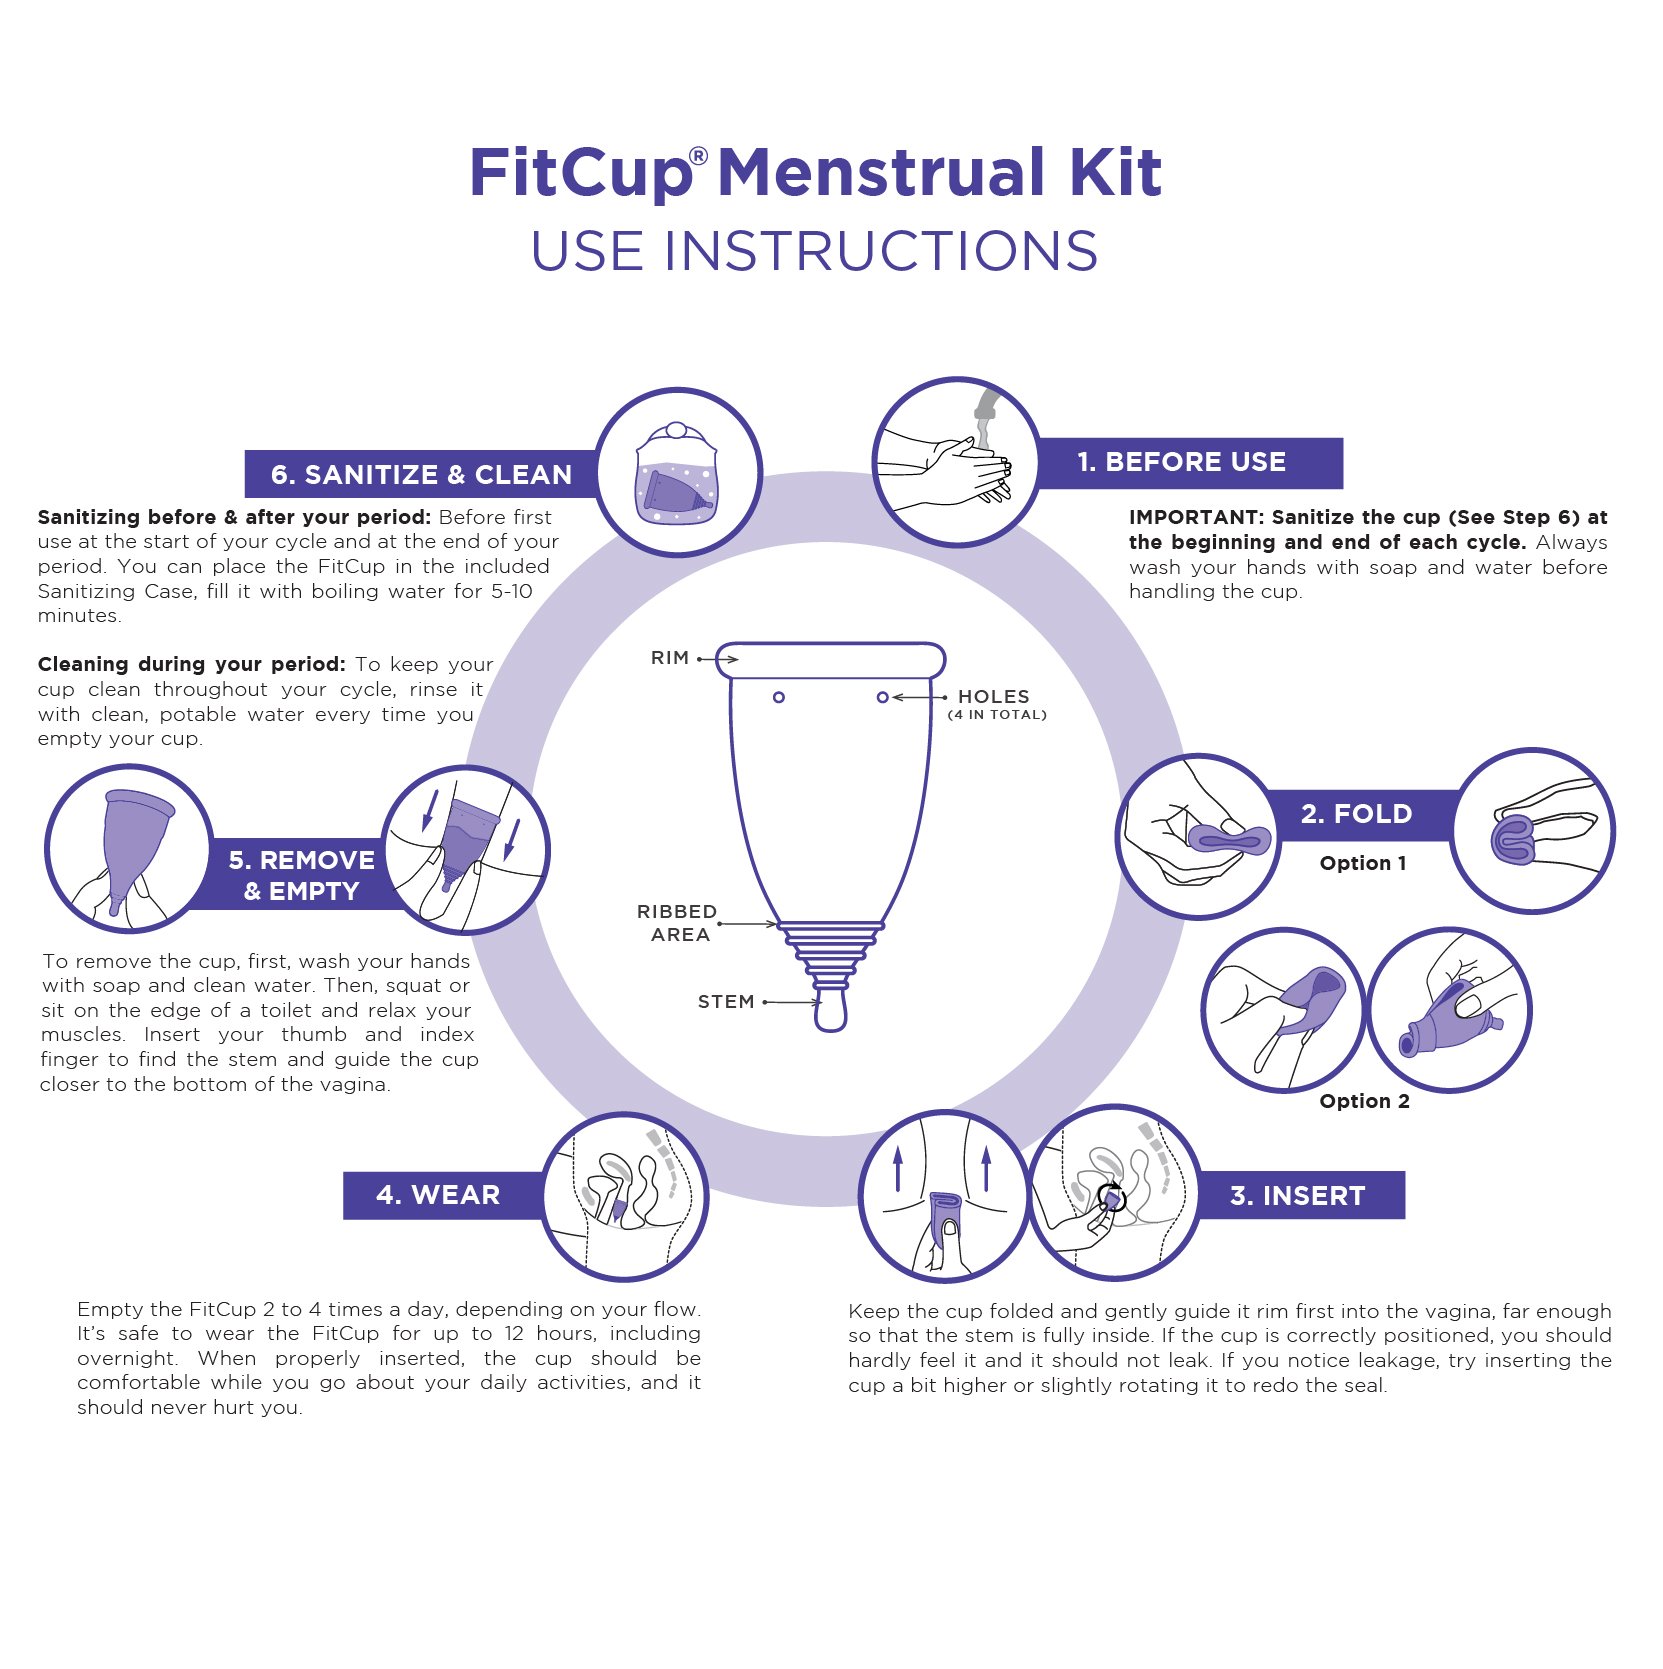 SheCup L (L = Longer stem for better grip) Recommended for beginners,  Researched & Certified Soft Menstrual Cup 